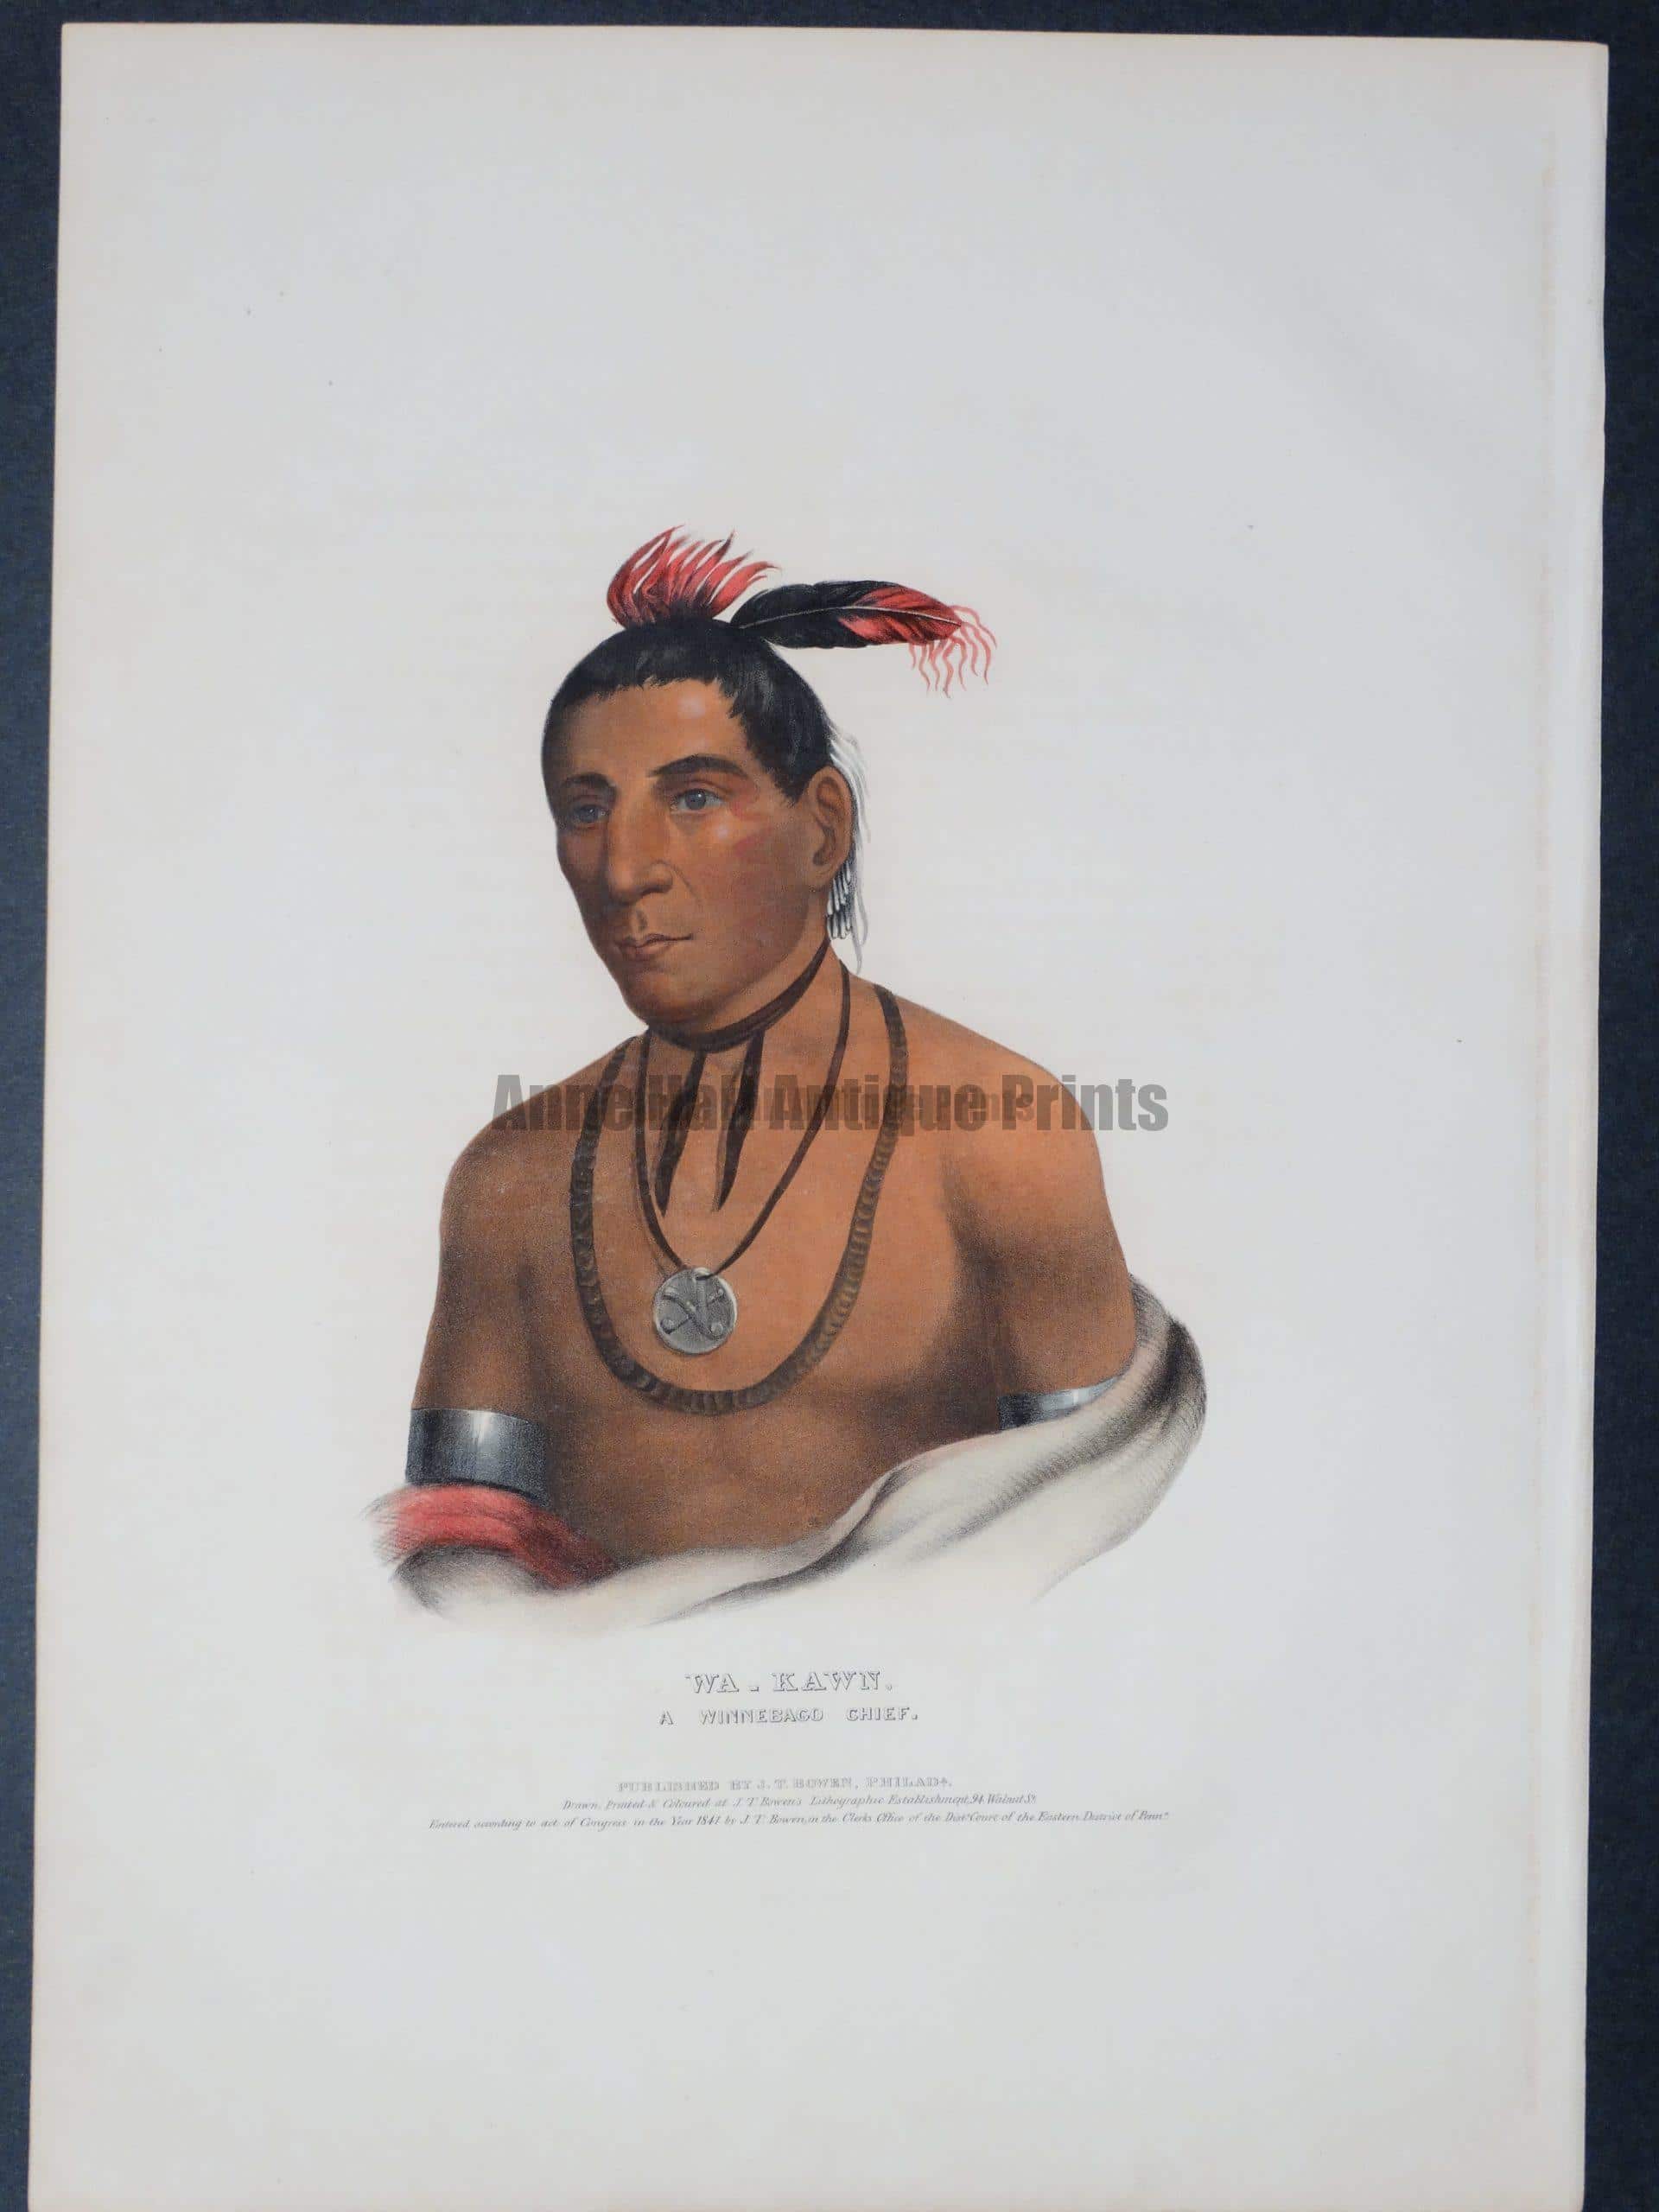 Handsome depiction of Wa-Kawn, with one feather, medal and beautiful tanned skin.